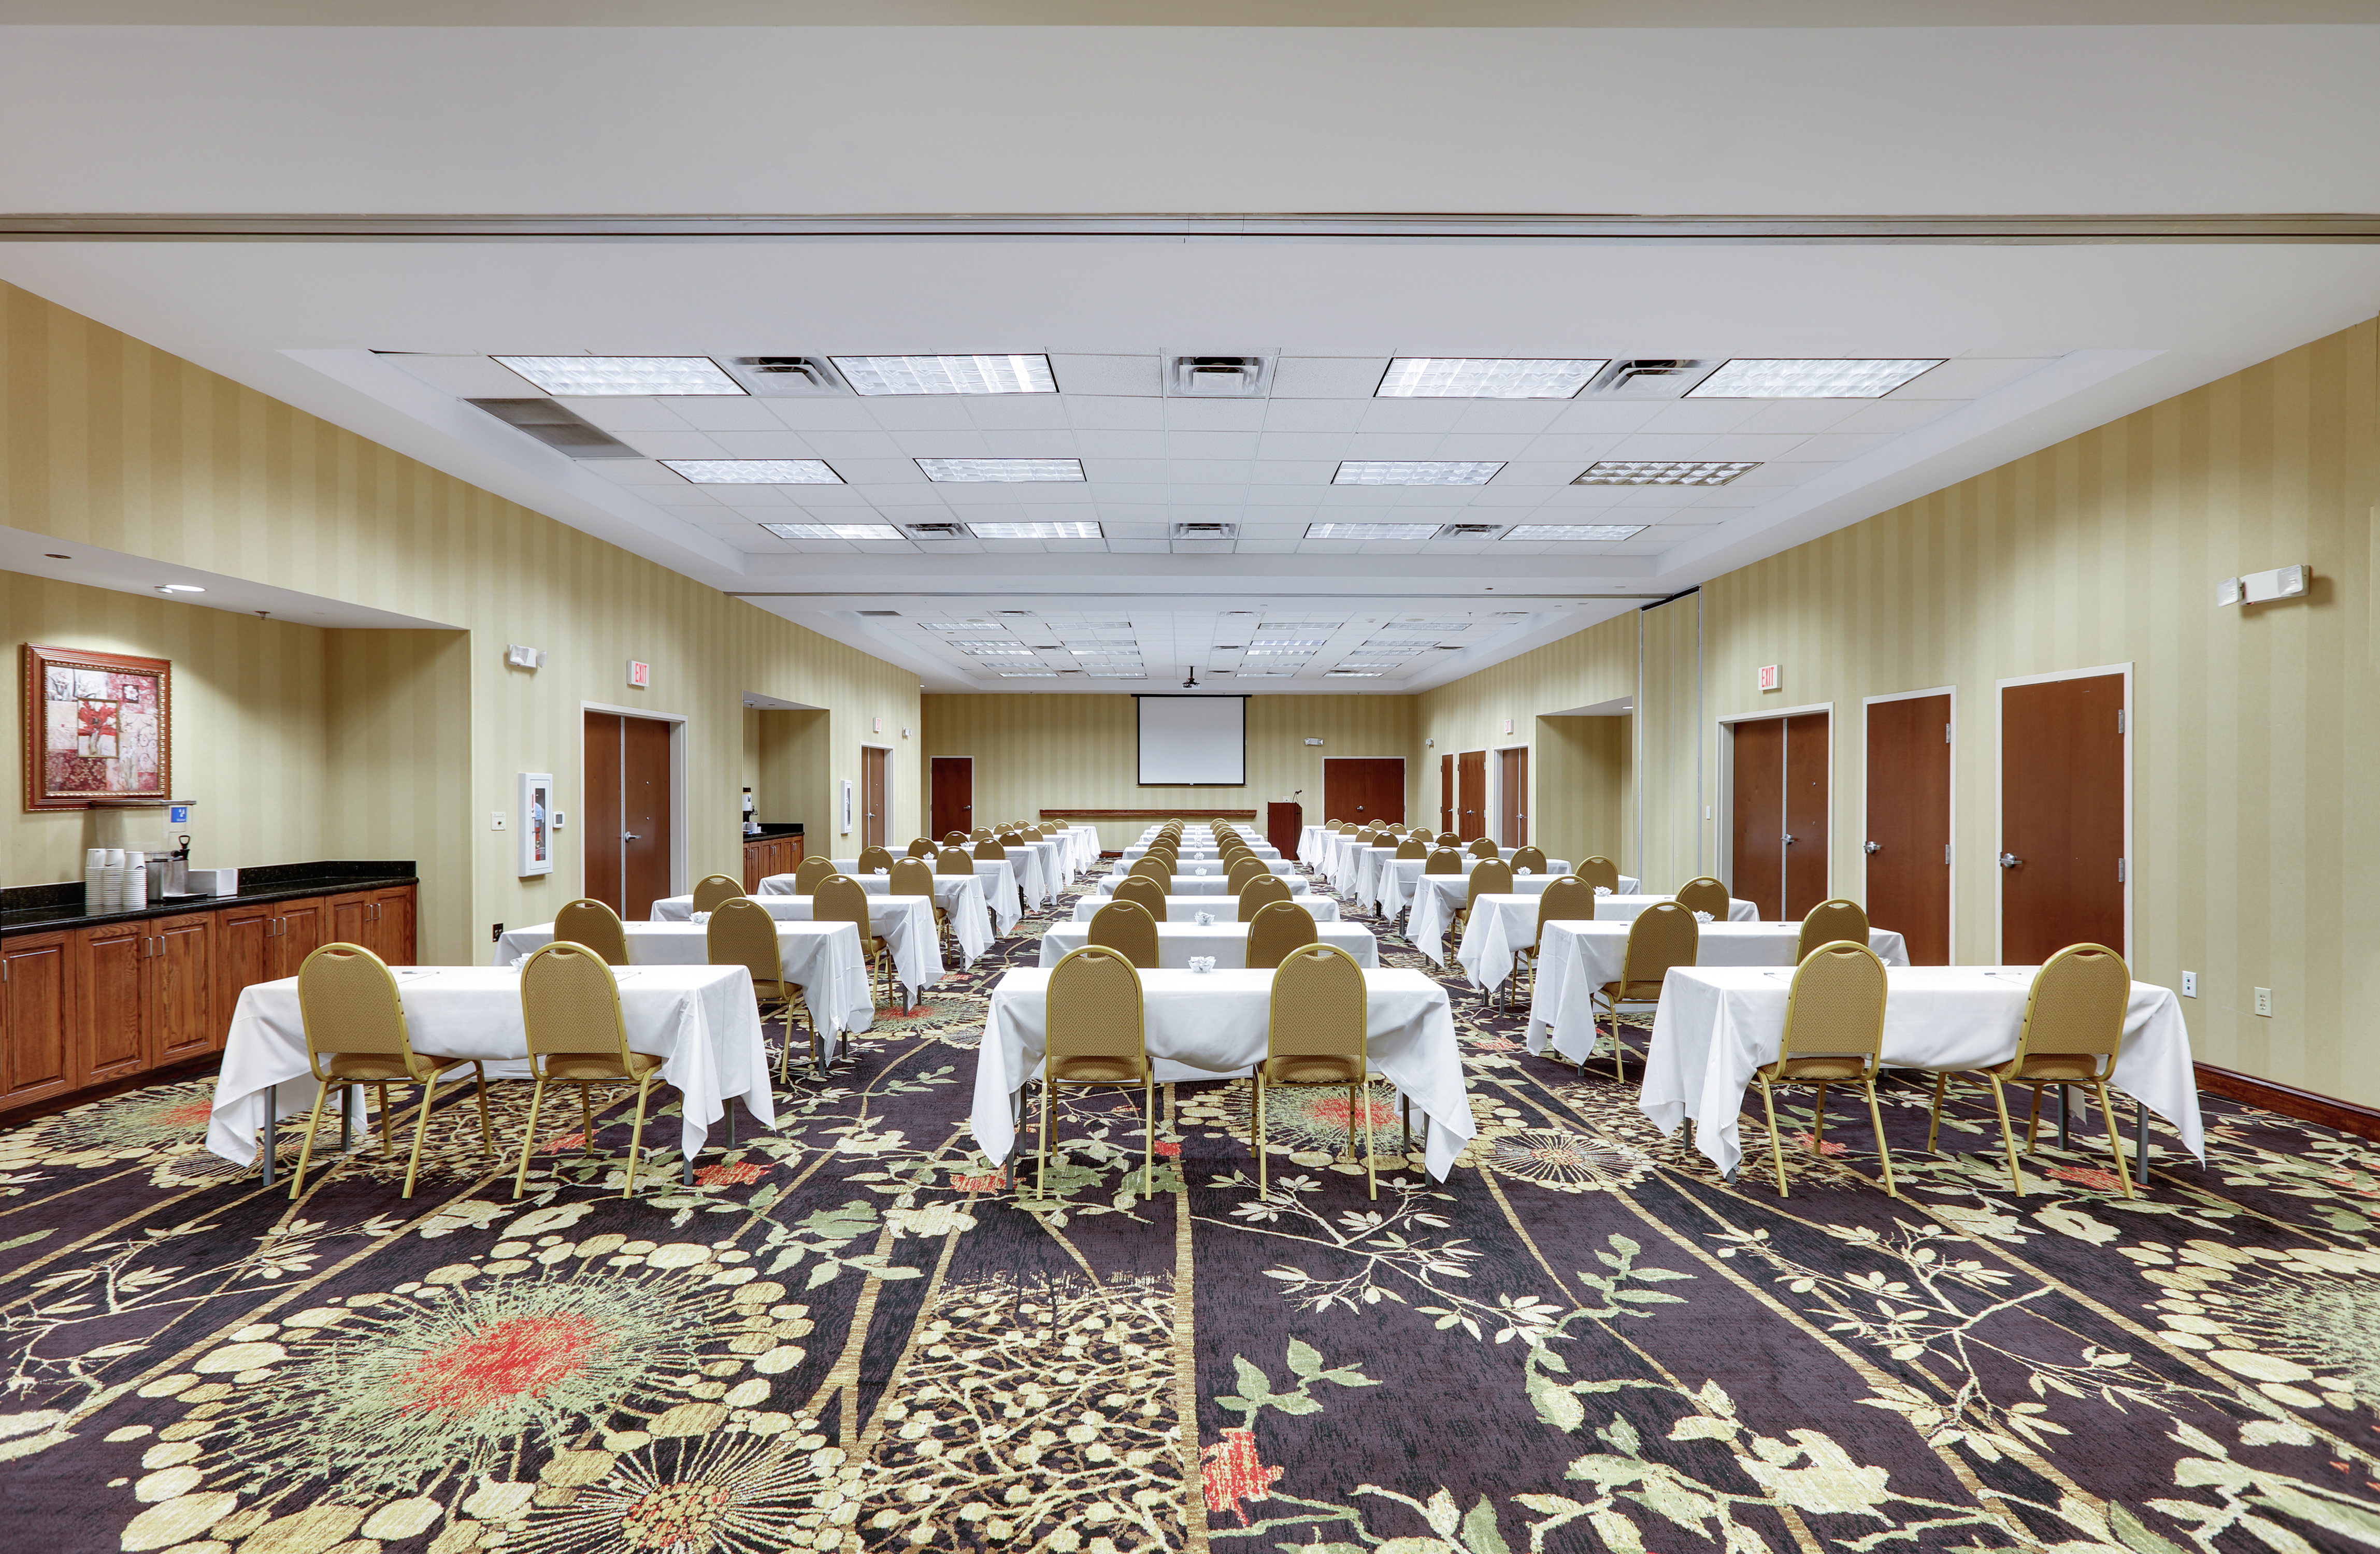 Large Meeting Room With Tables And Seating 